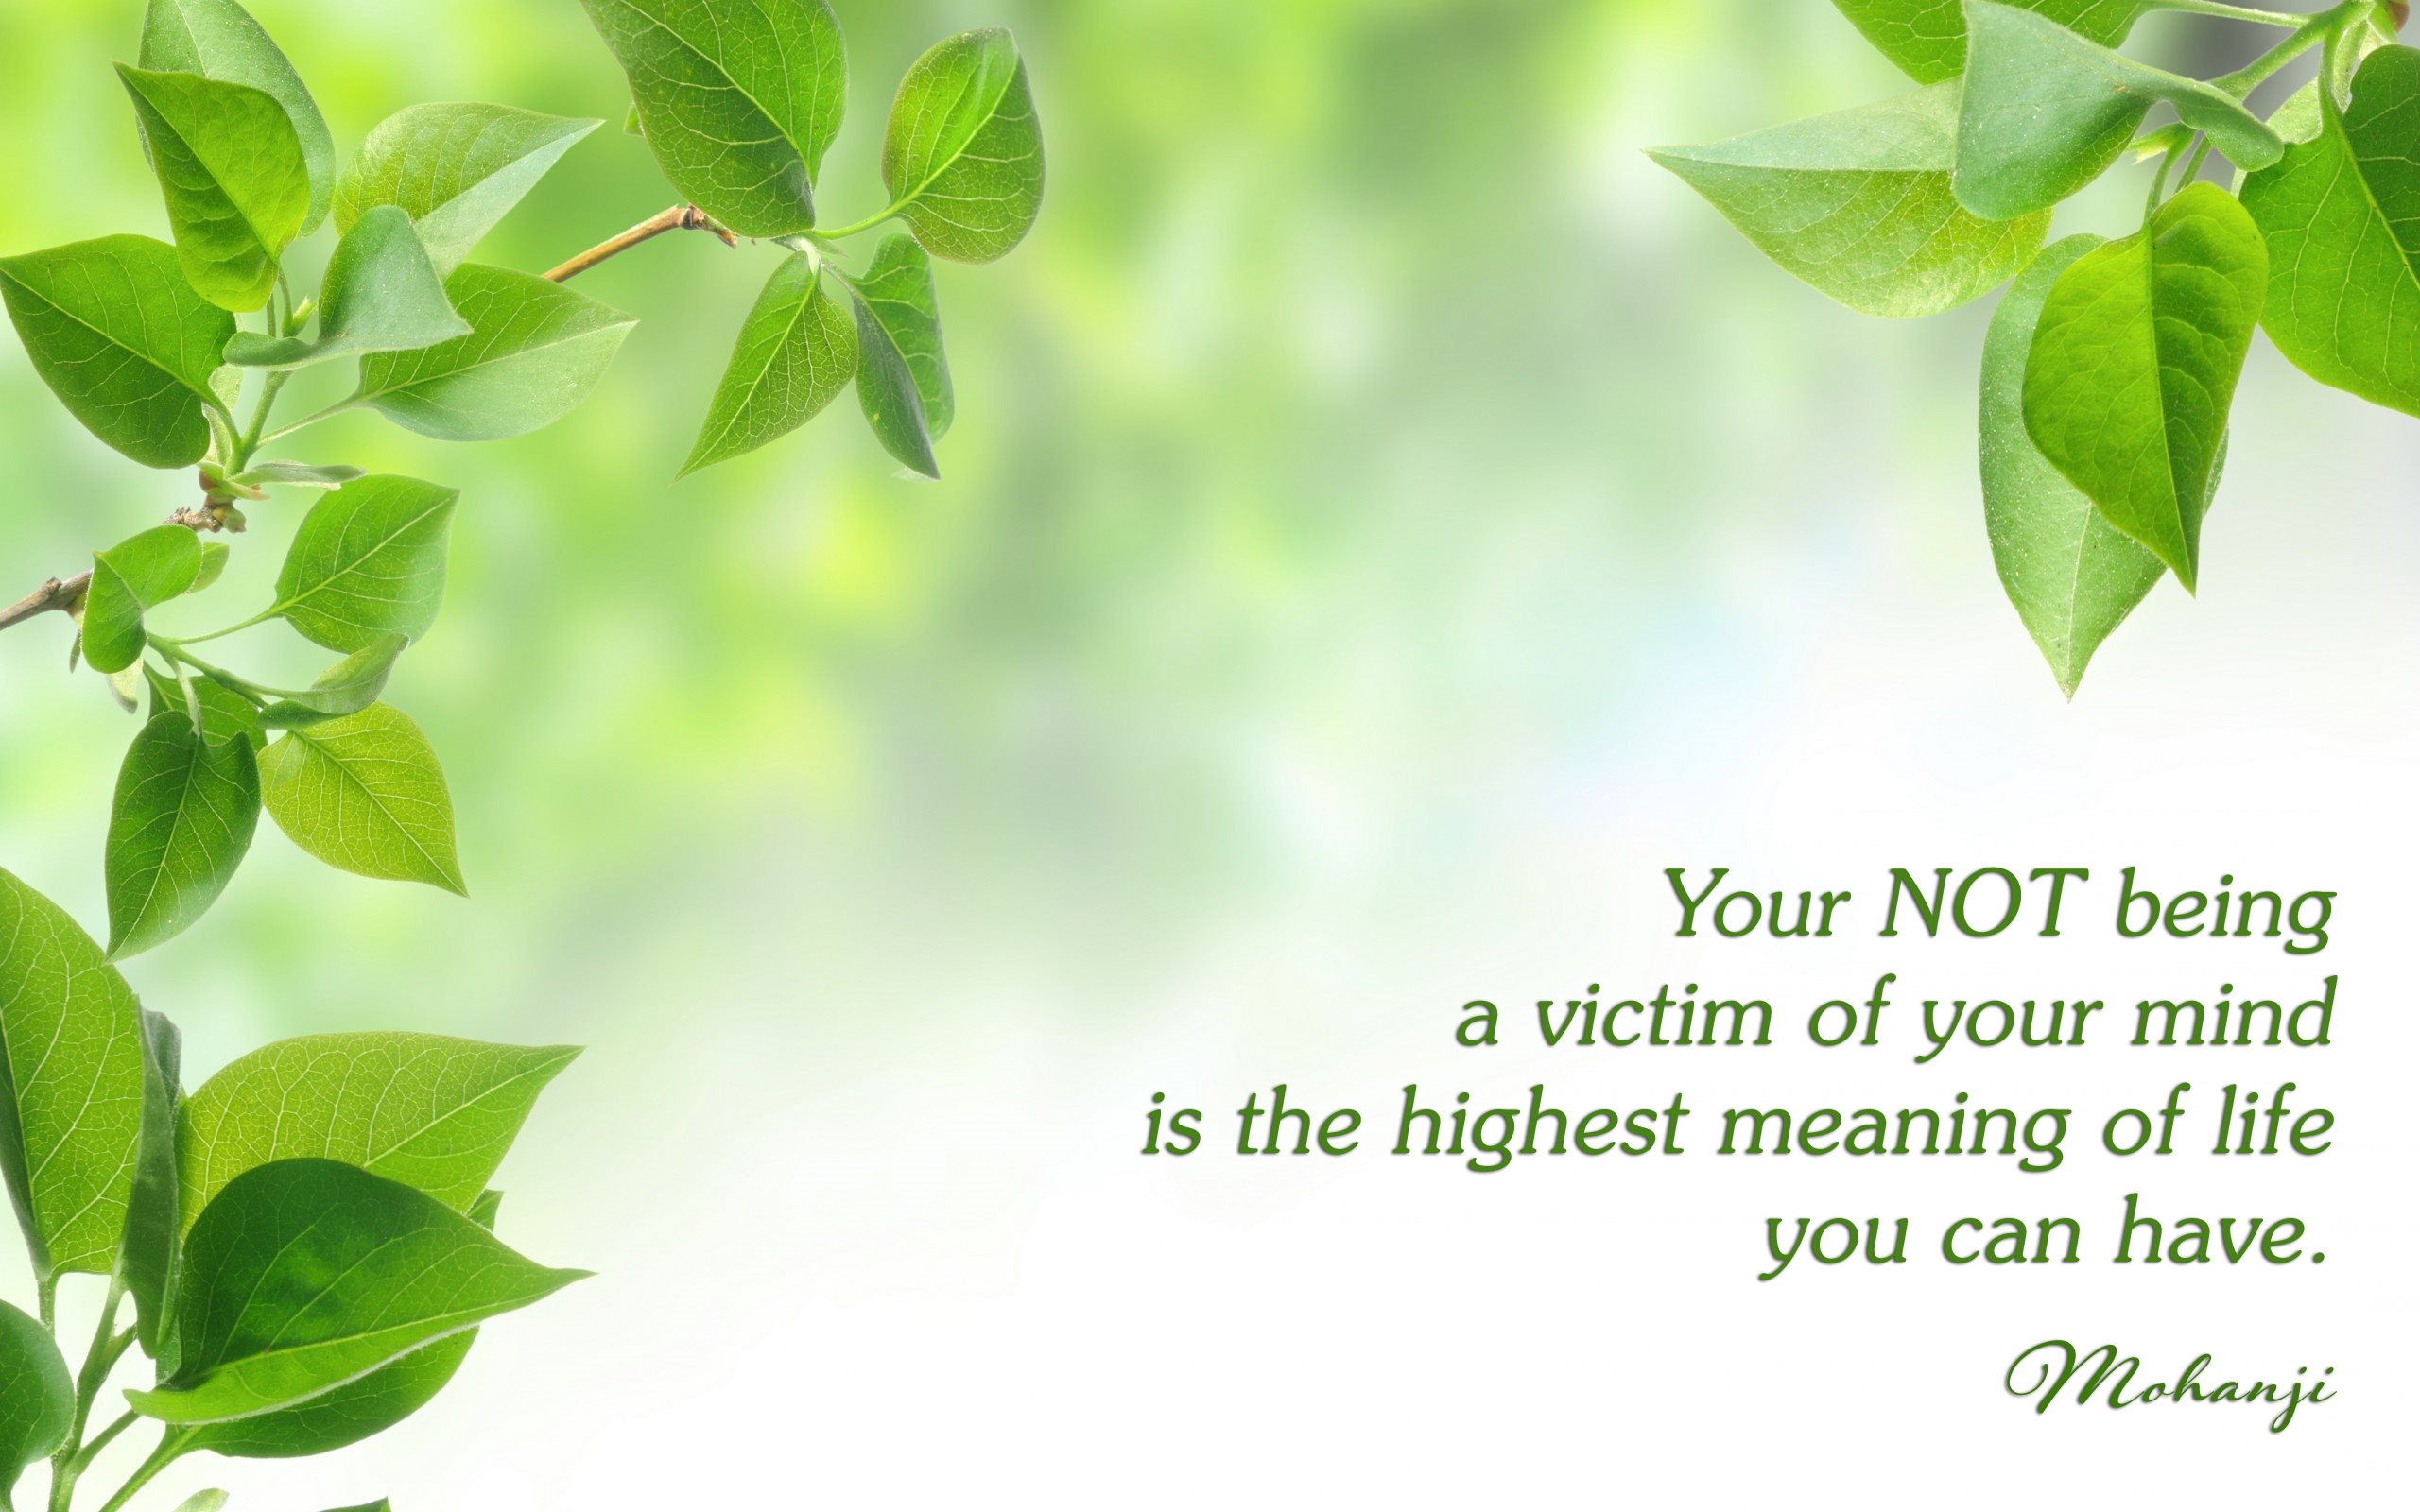 Mohanji quote - Your NOT being a victim of your mind